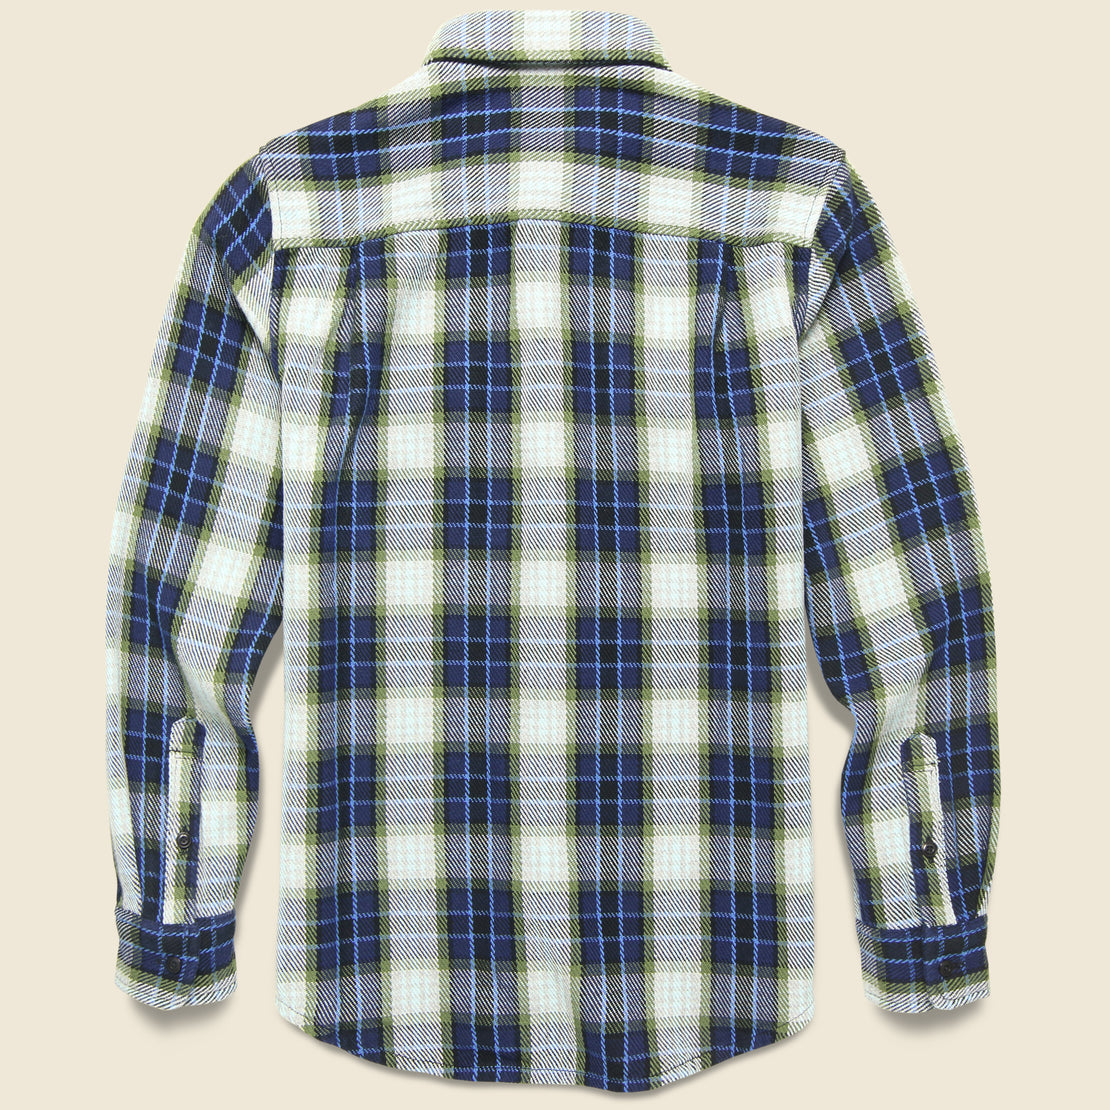 Blanket Shirt - Marine Felize Plaid - Outerknown - STAG Provisions - Tops - L/S Woven - Plaid